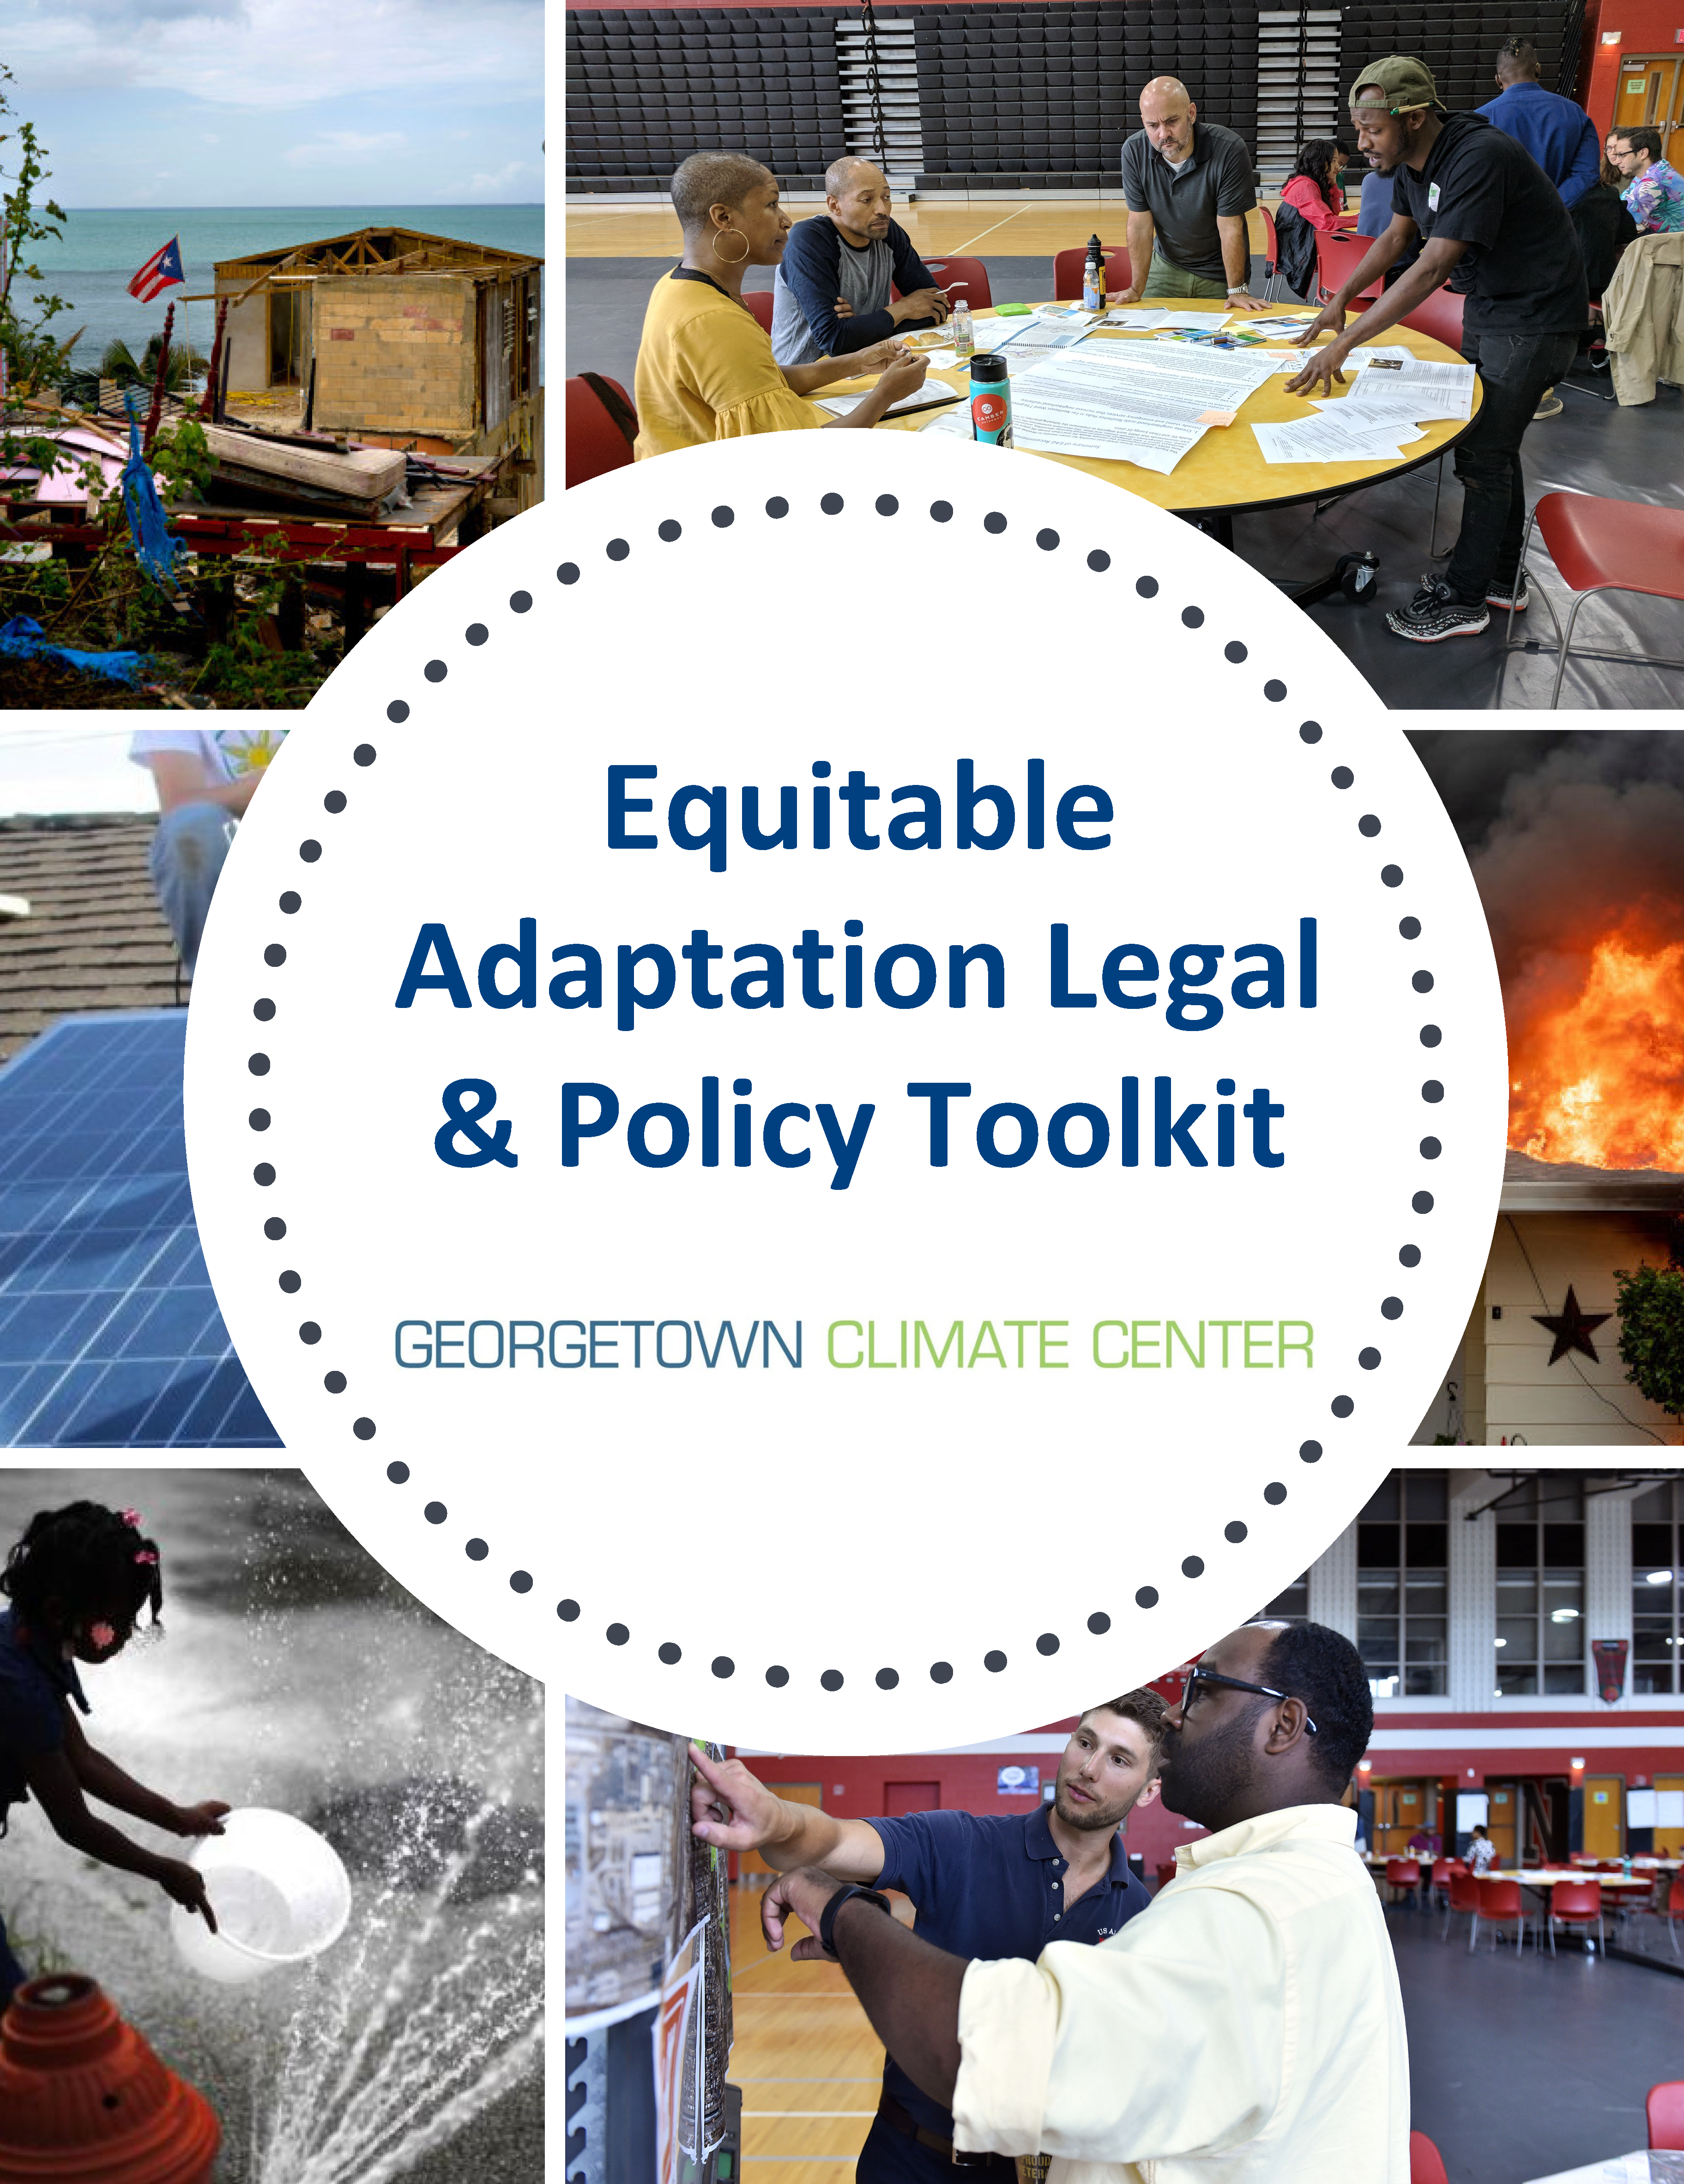 A collage of pictures showing: two men pointing at a large map and discussing; children playing in urban splash parks; a home after a hurricane in shambles; a wildfire; a community engagement session where people sit around tables and discuss. In the middle of the collage is a white circle with blue text saying, "Equitable Adaptation Legal and Policy Toolkit Georgetown Climate Center."